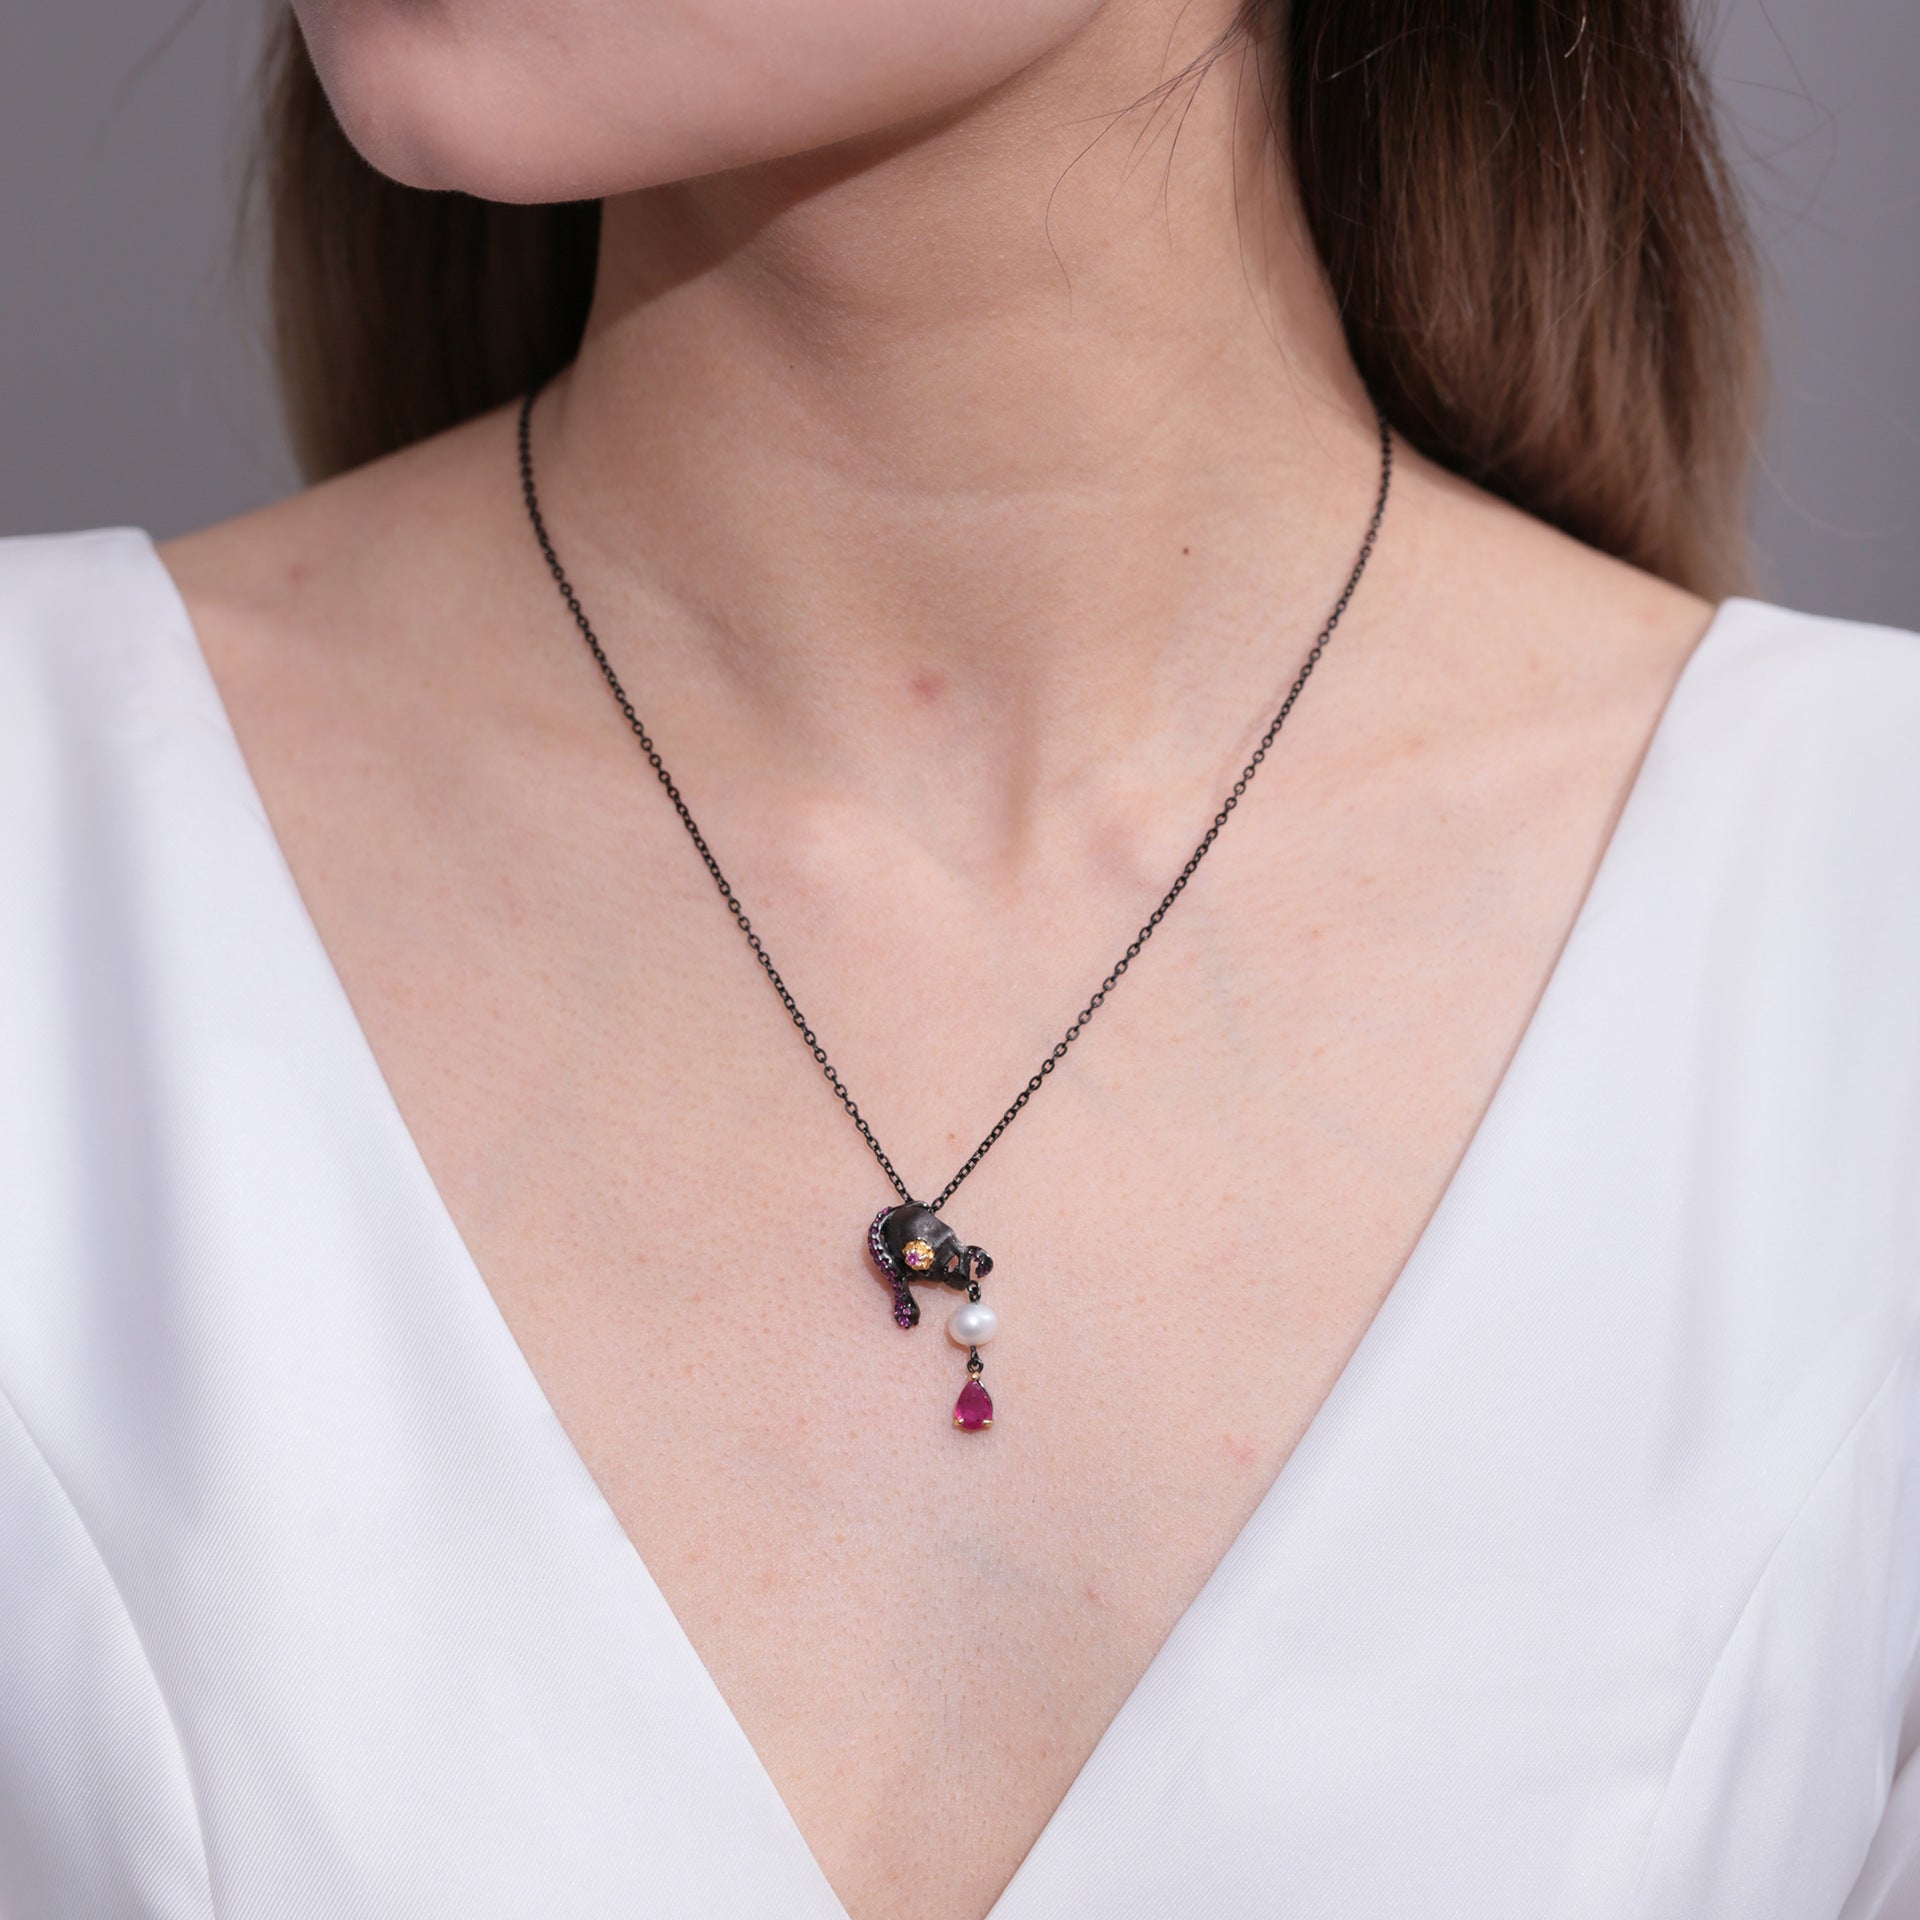 Dark Skull with Pearl and Red Treasure Pendant Silver Necklace for Women